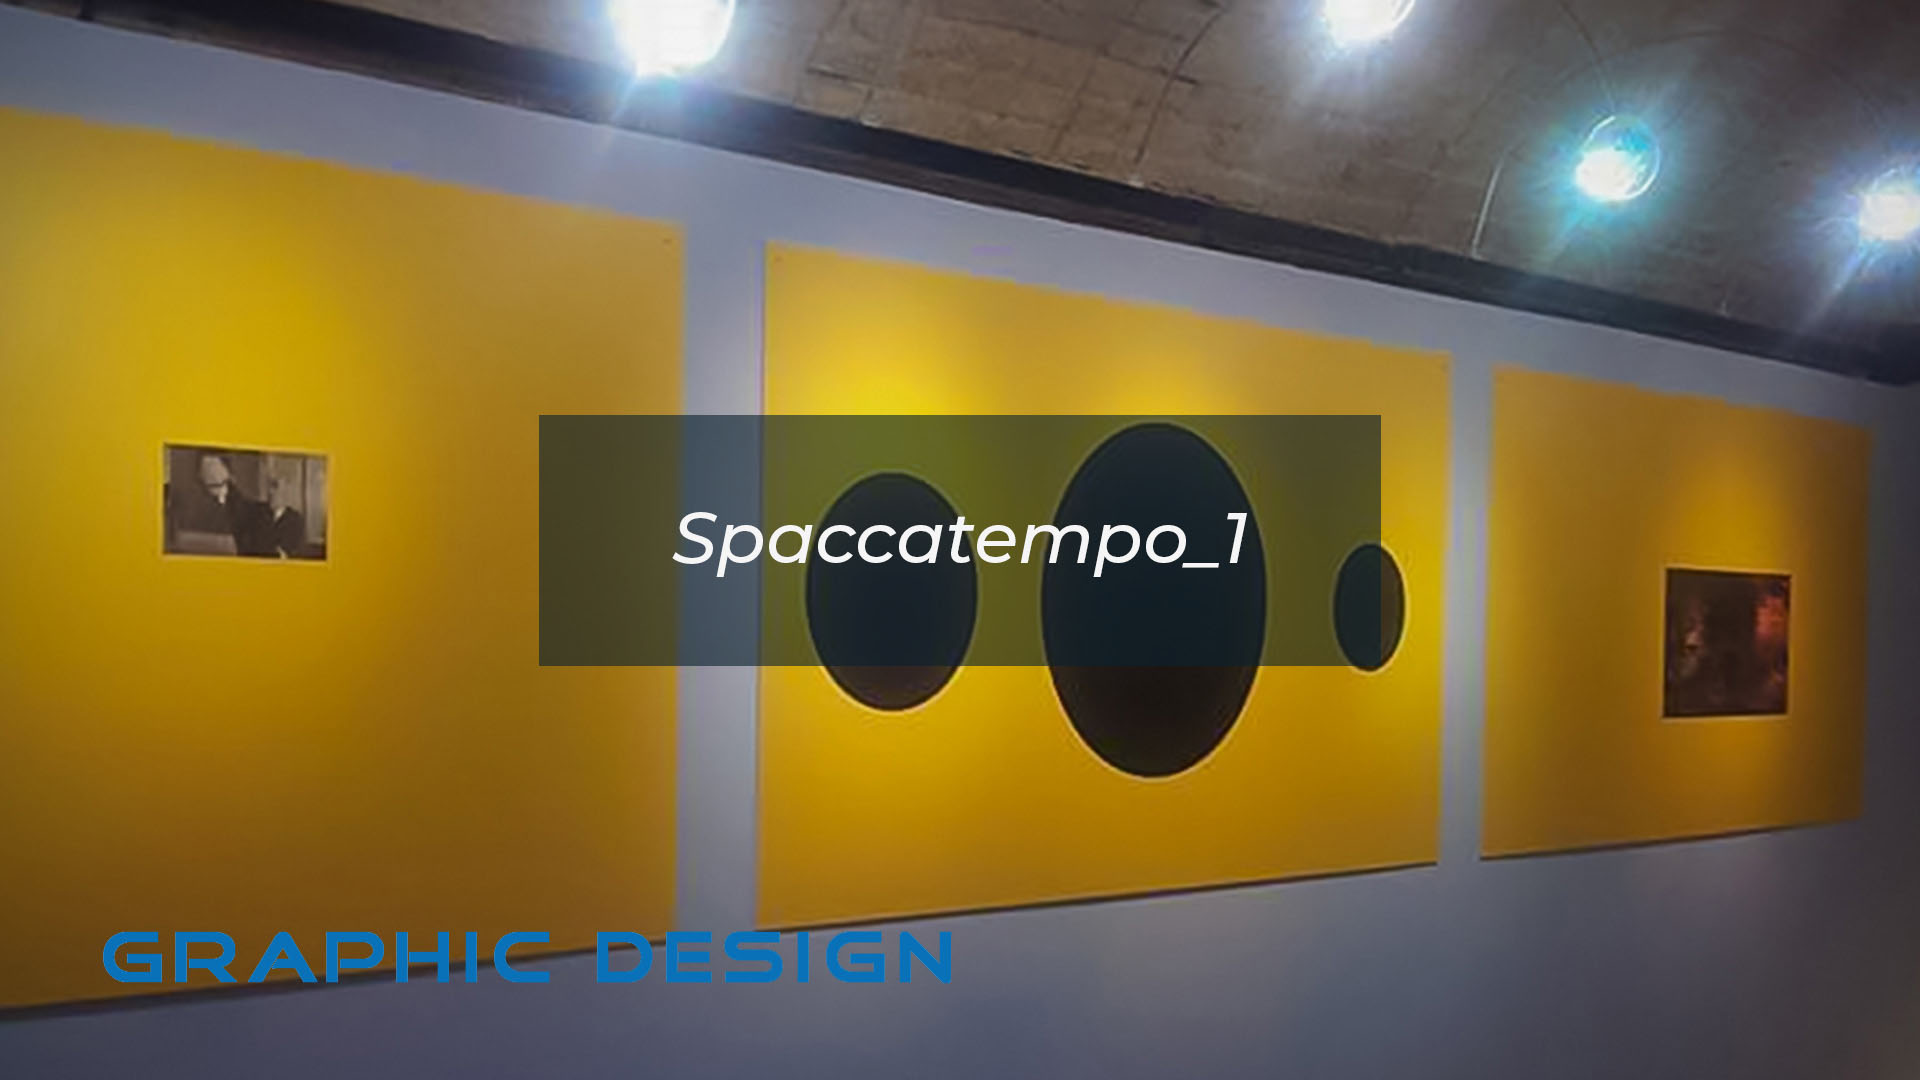 Graphic Design Spaccatempo_1 by DiMMD